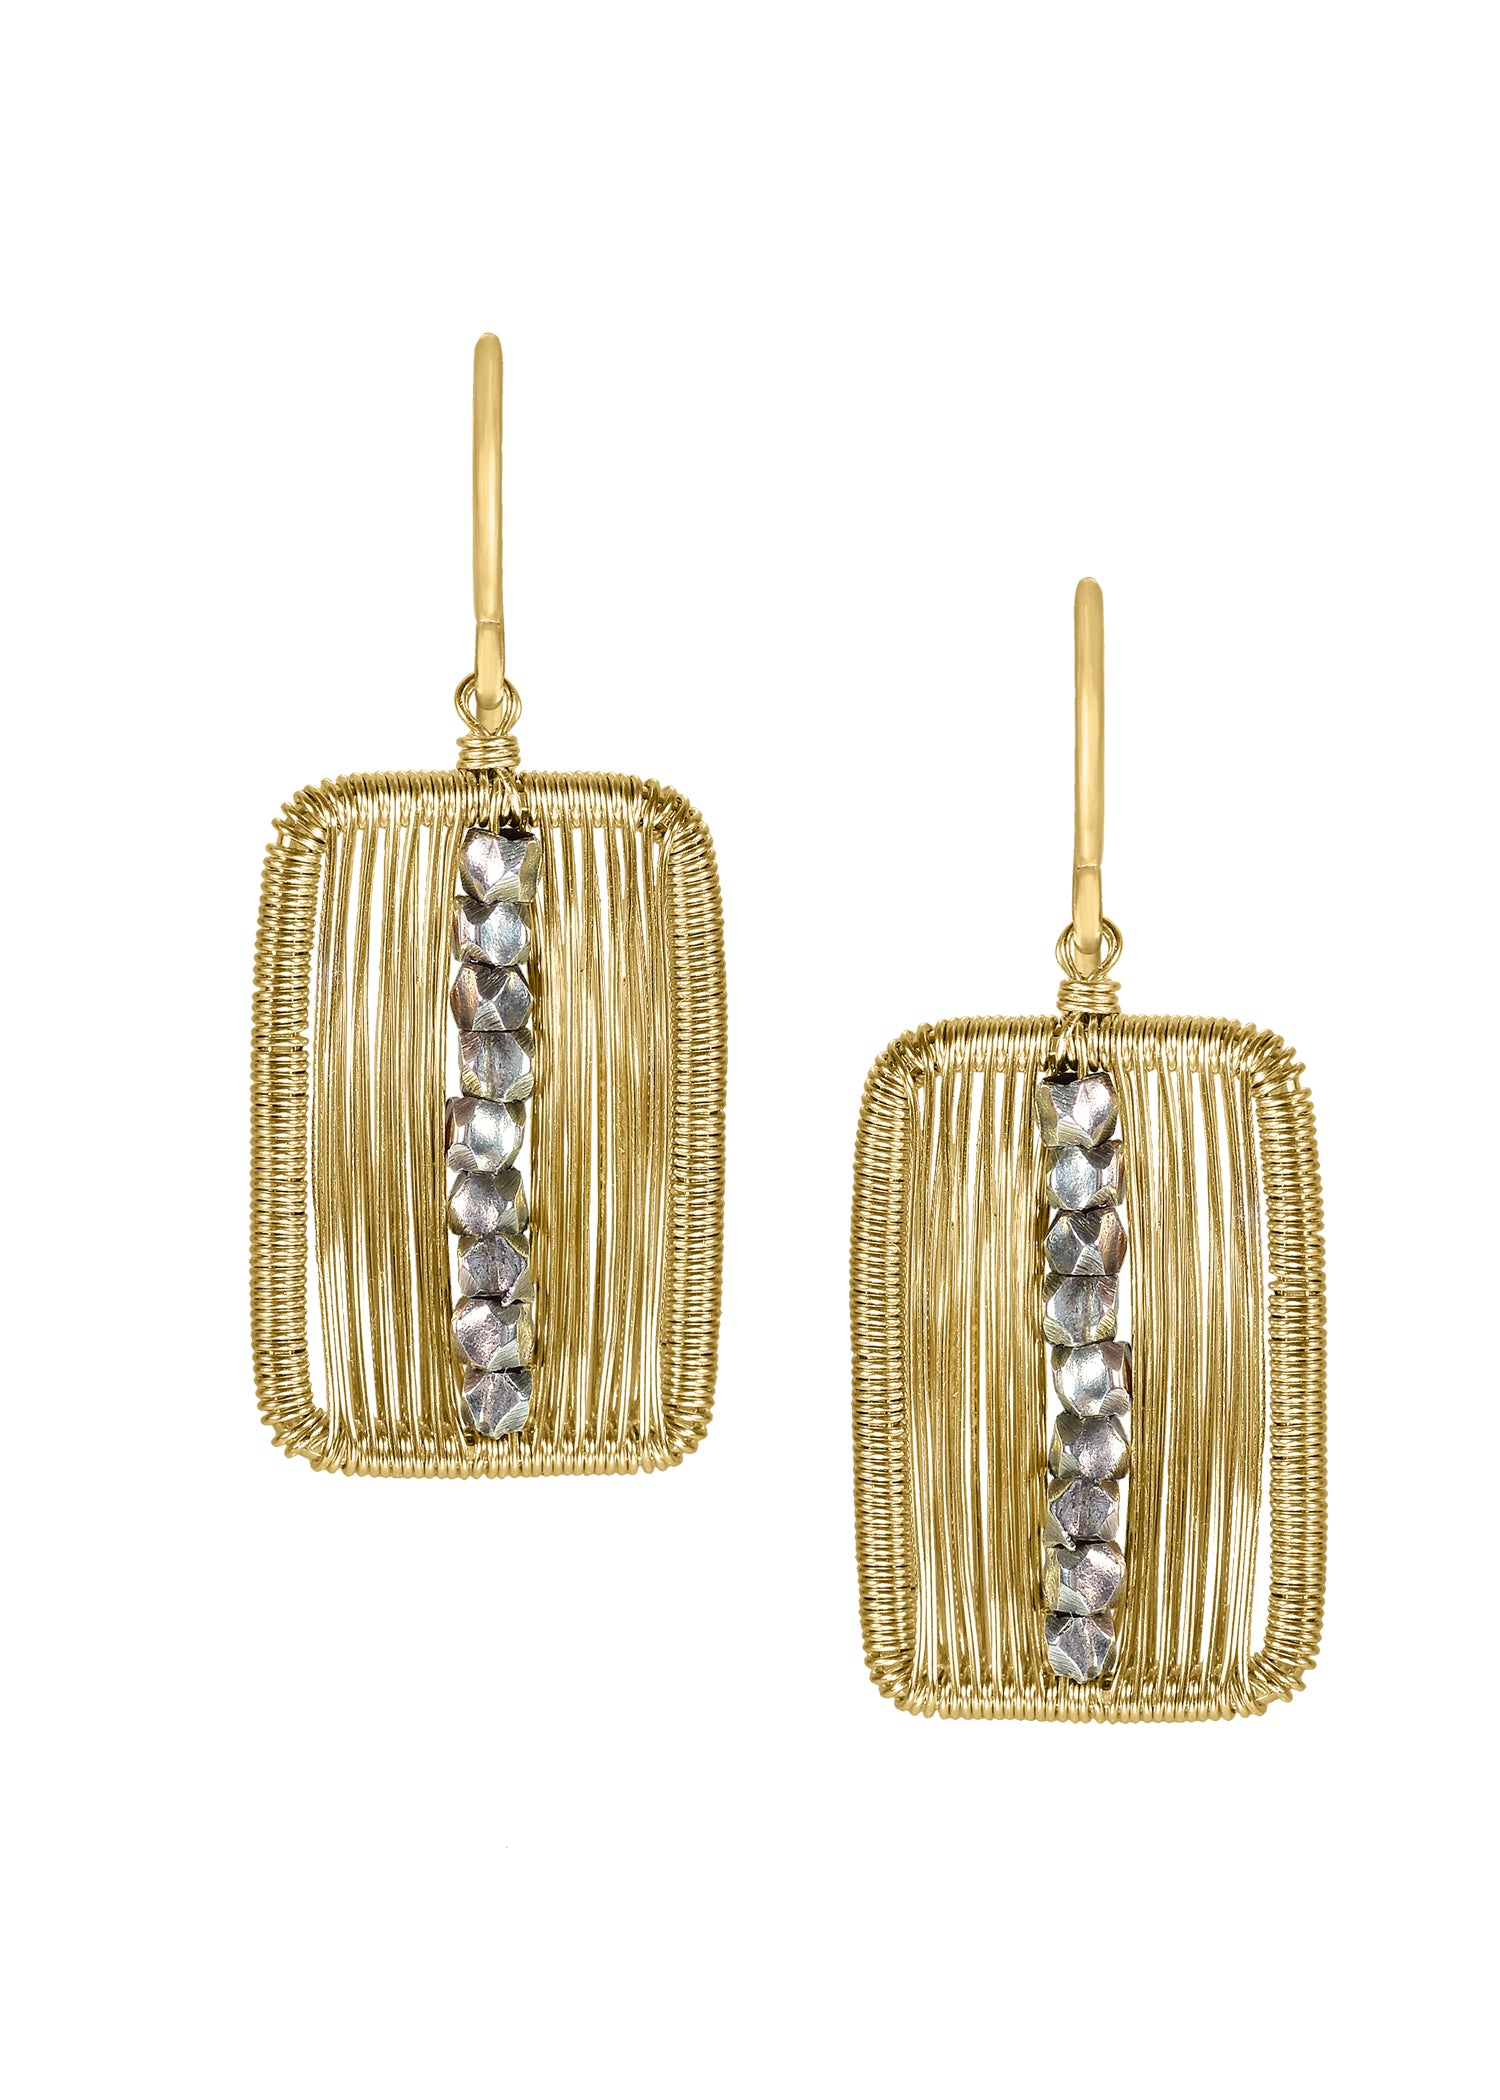 14k gold fill Sterling silver Earrings measure 1-1/4" in length (including the ear wires) and 1/2" in width Handmade in our Los Angeles studio